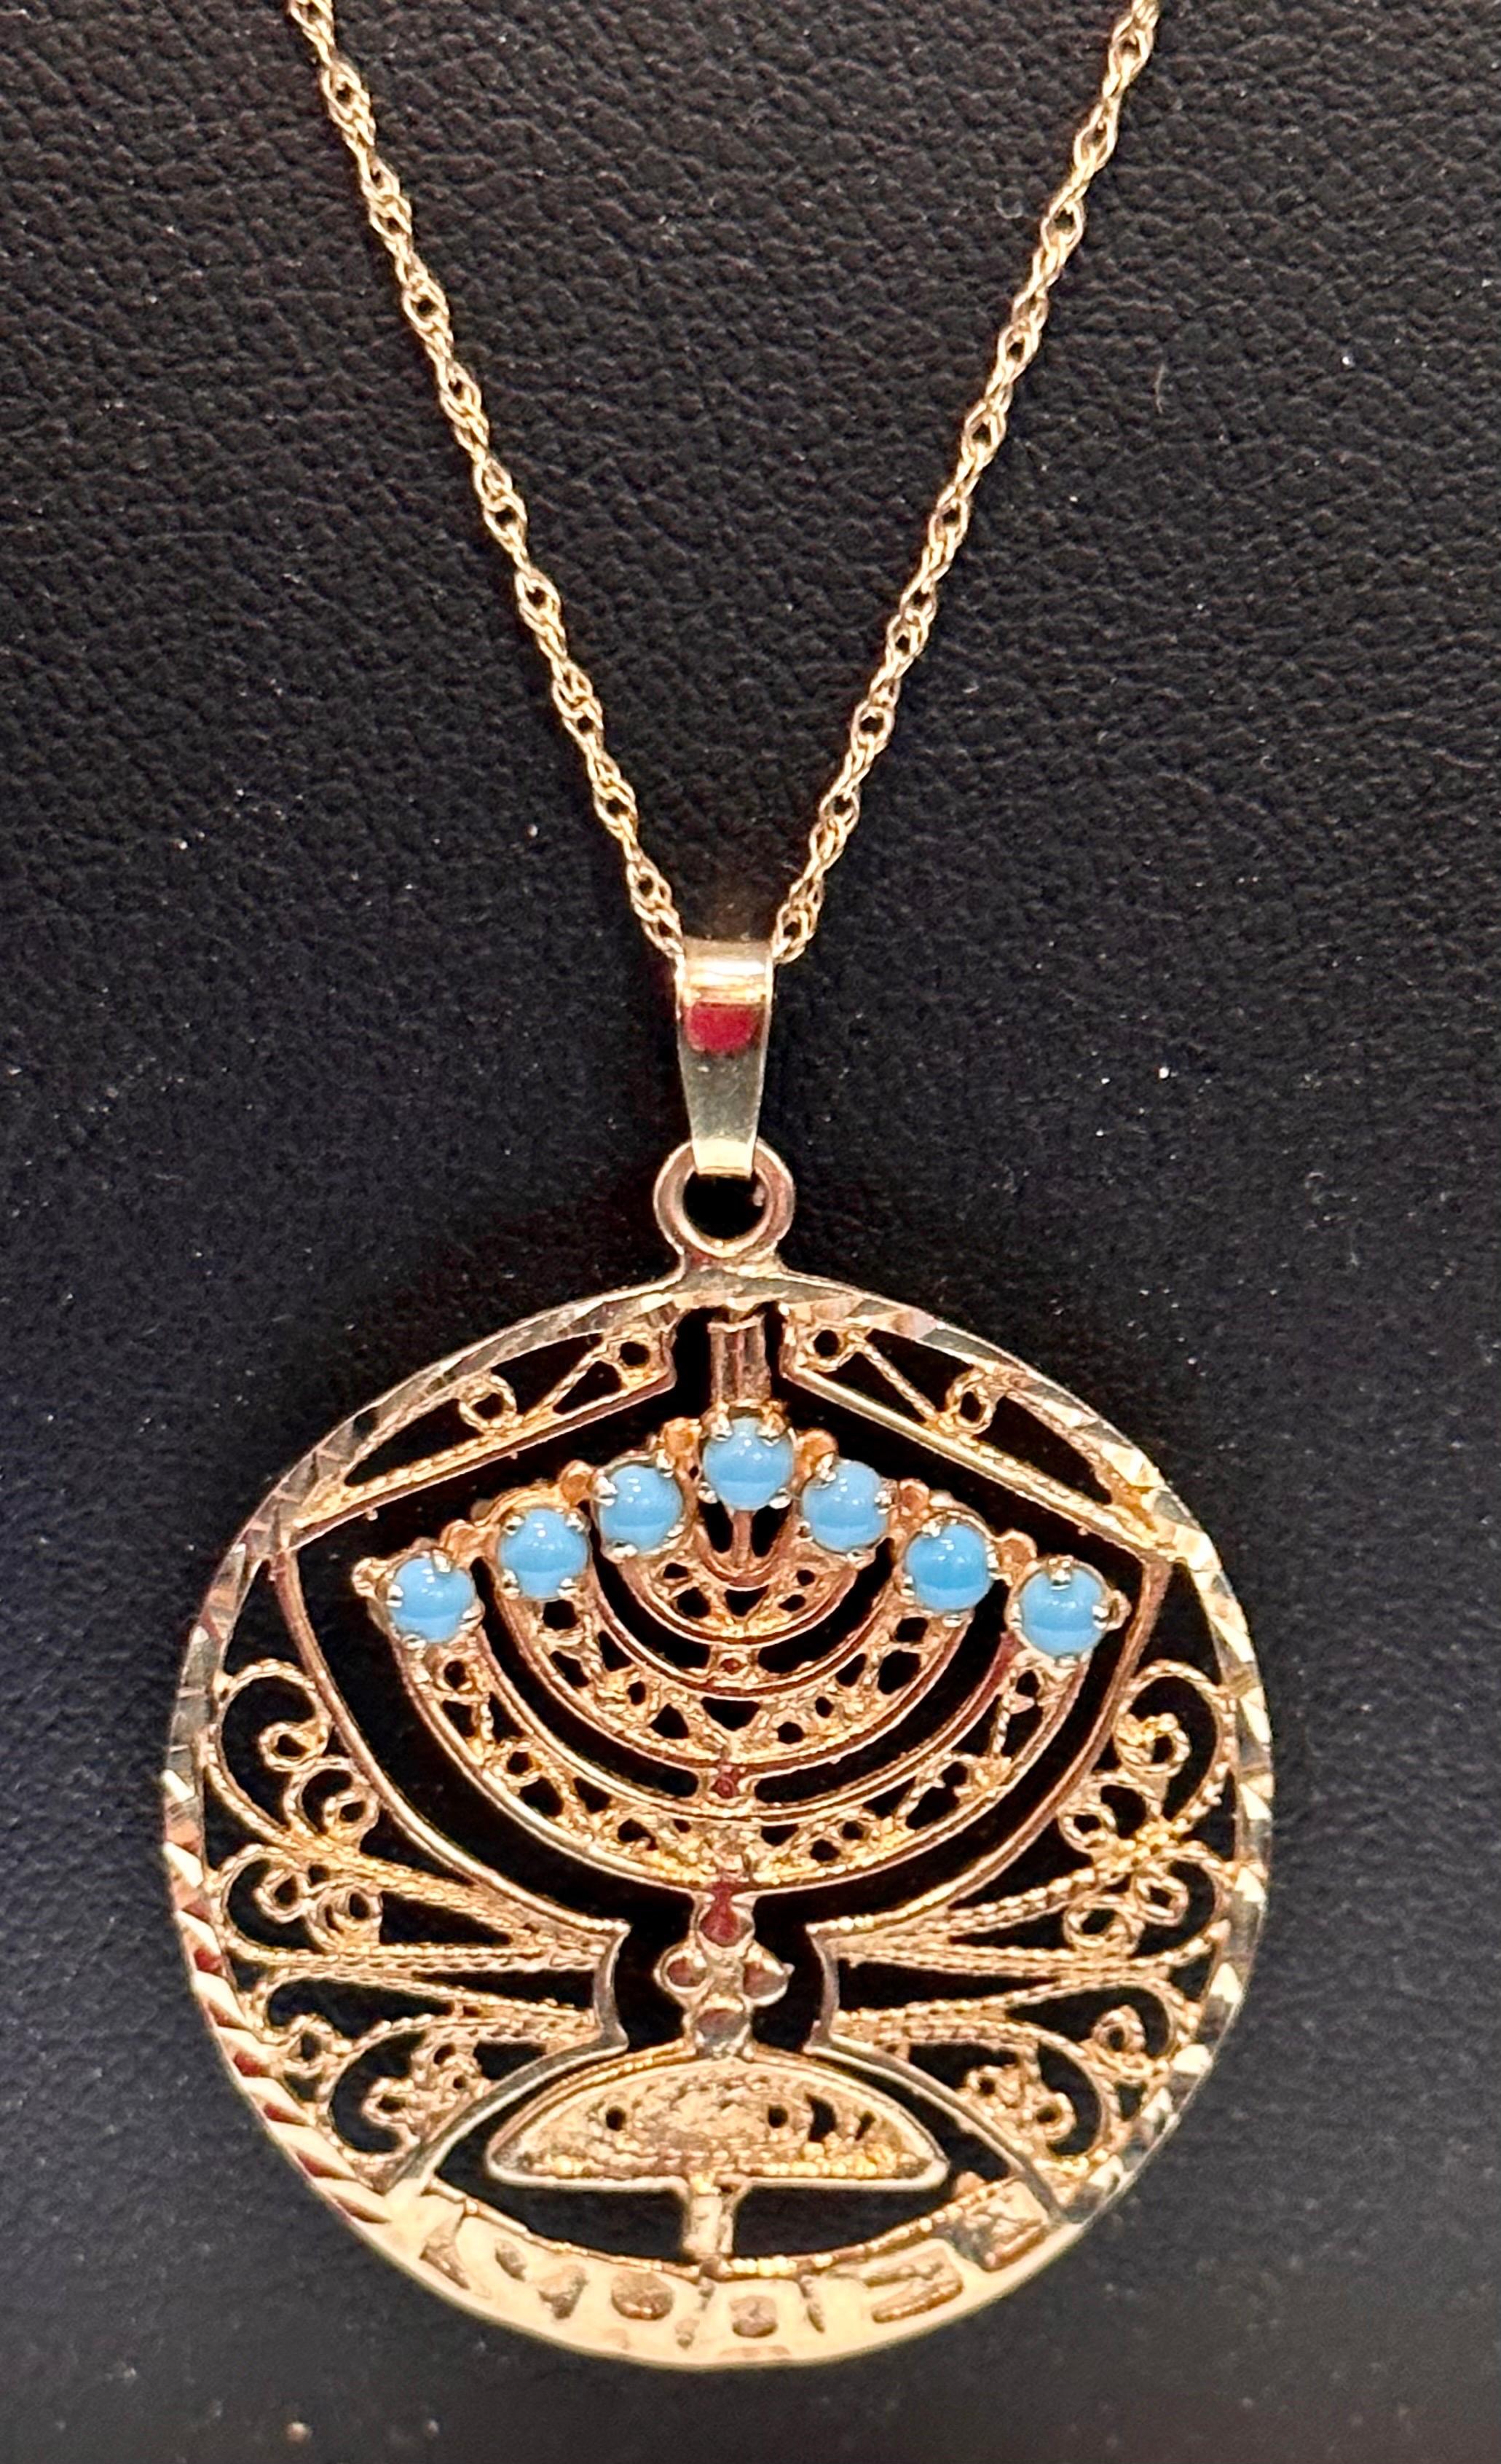 
Gold Shabbat Menorah Ruby and Turquoise Pendant Necklace with chain.
This is a Menorah which has ruby on one side and turquoise on the other side.
Good gift for Jewish people during Hanukkah.
Looking for a stunning piece of jewelry to add to your